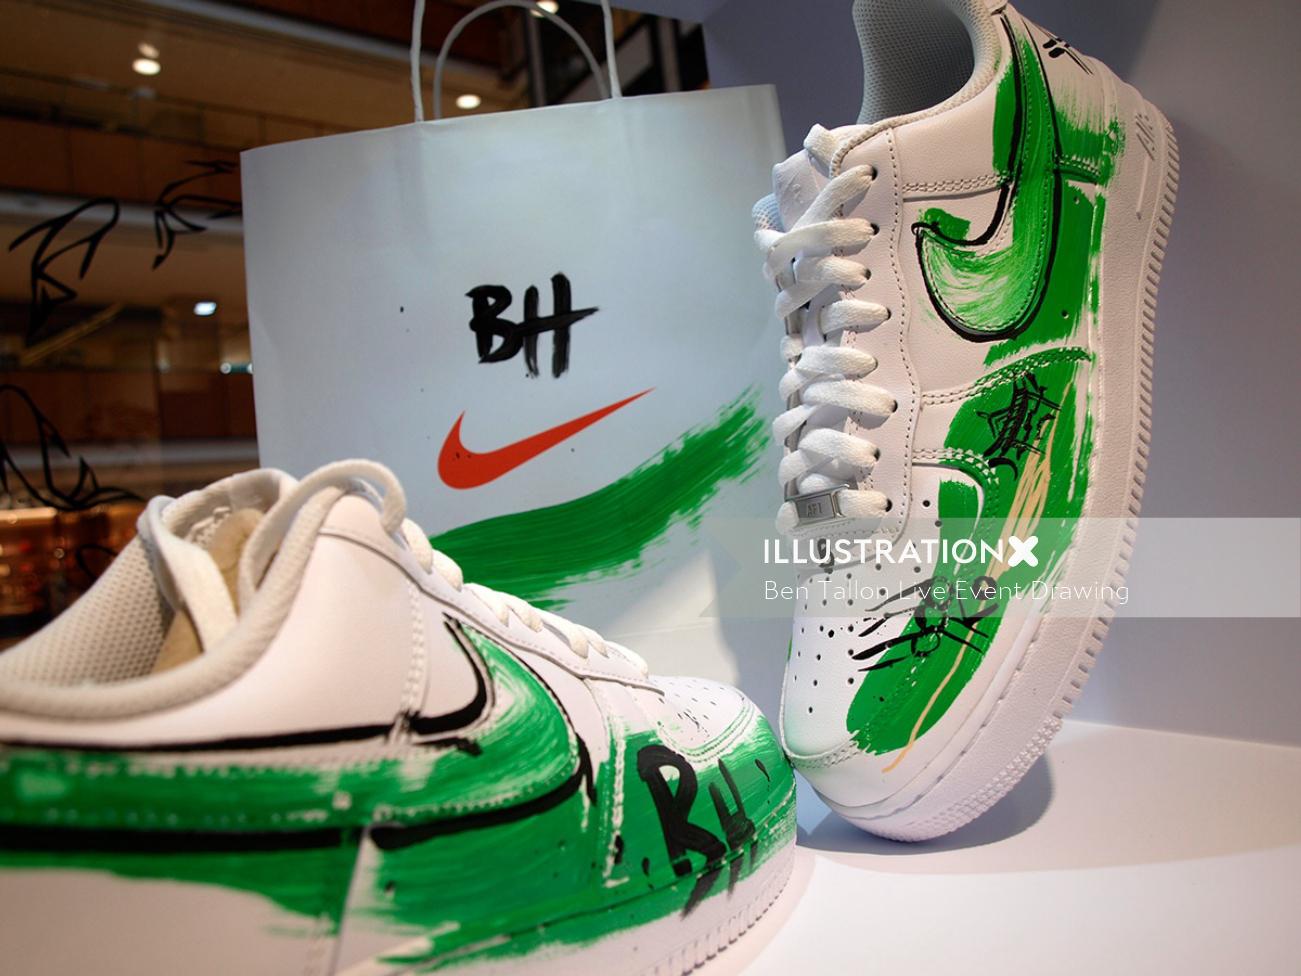 Live event drawing nike shoes logo
